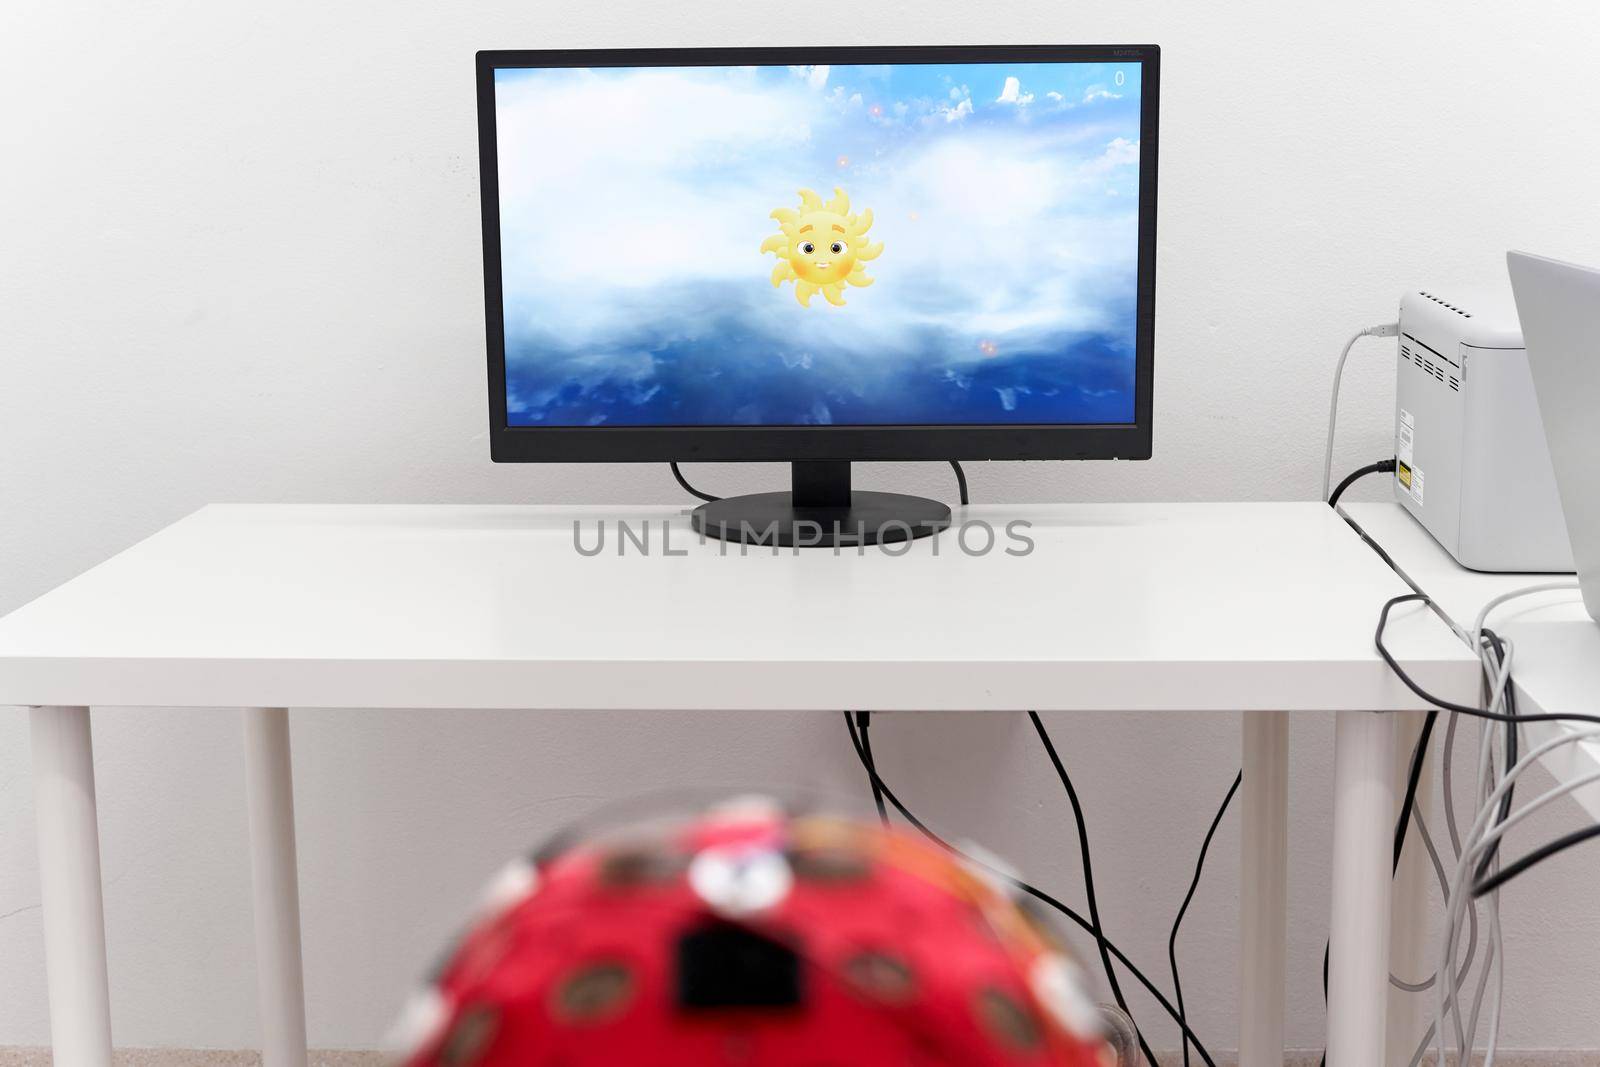 Patient looking at a screen with a picture of a sun during a biofeedback session by WesternExoticStockers